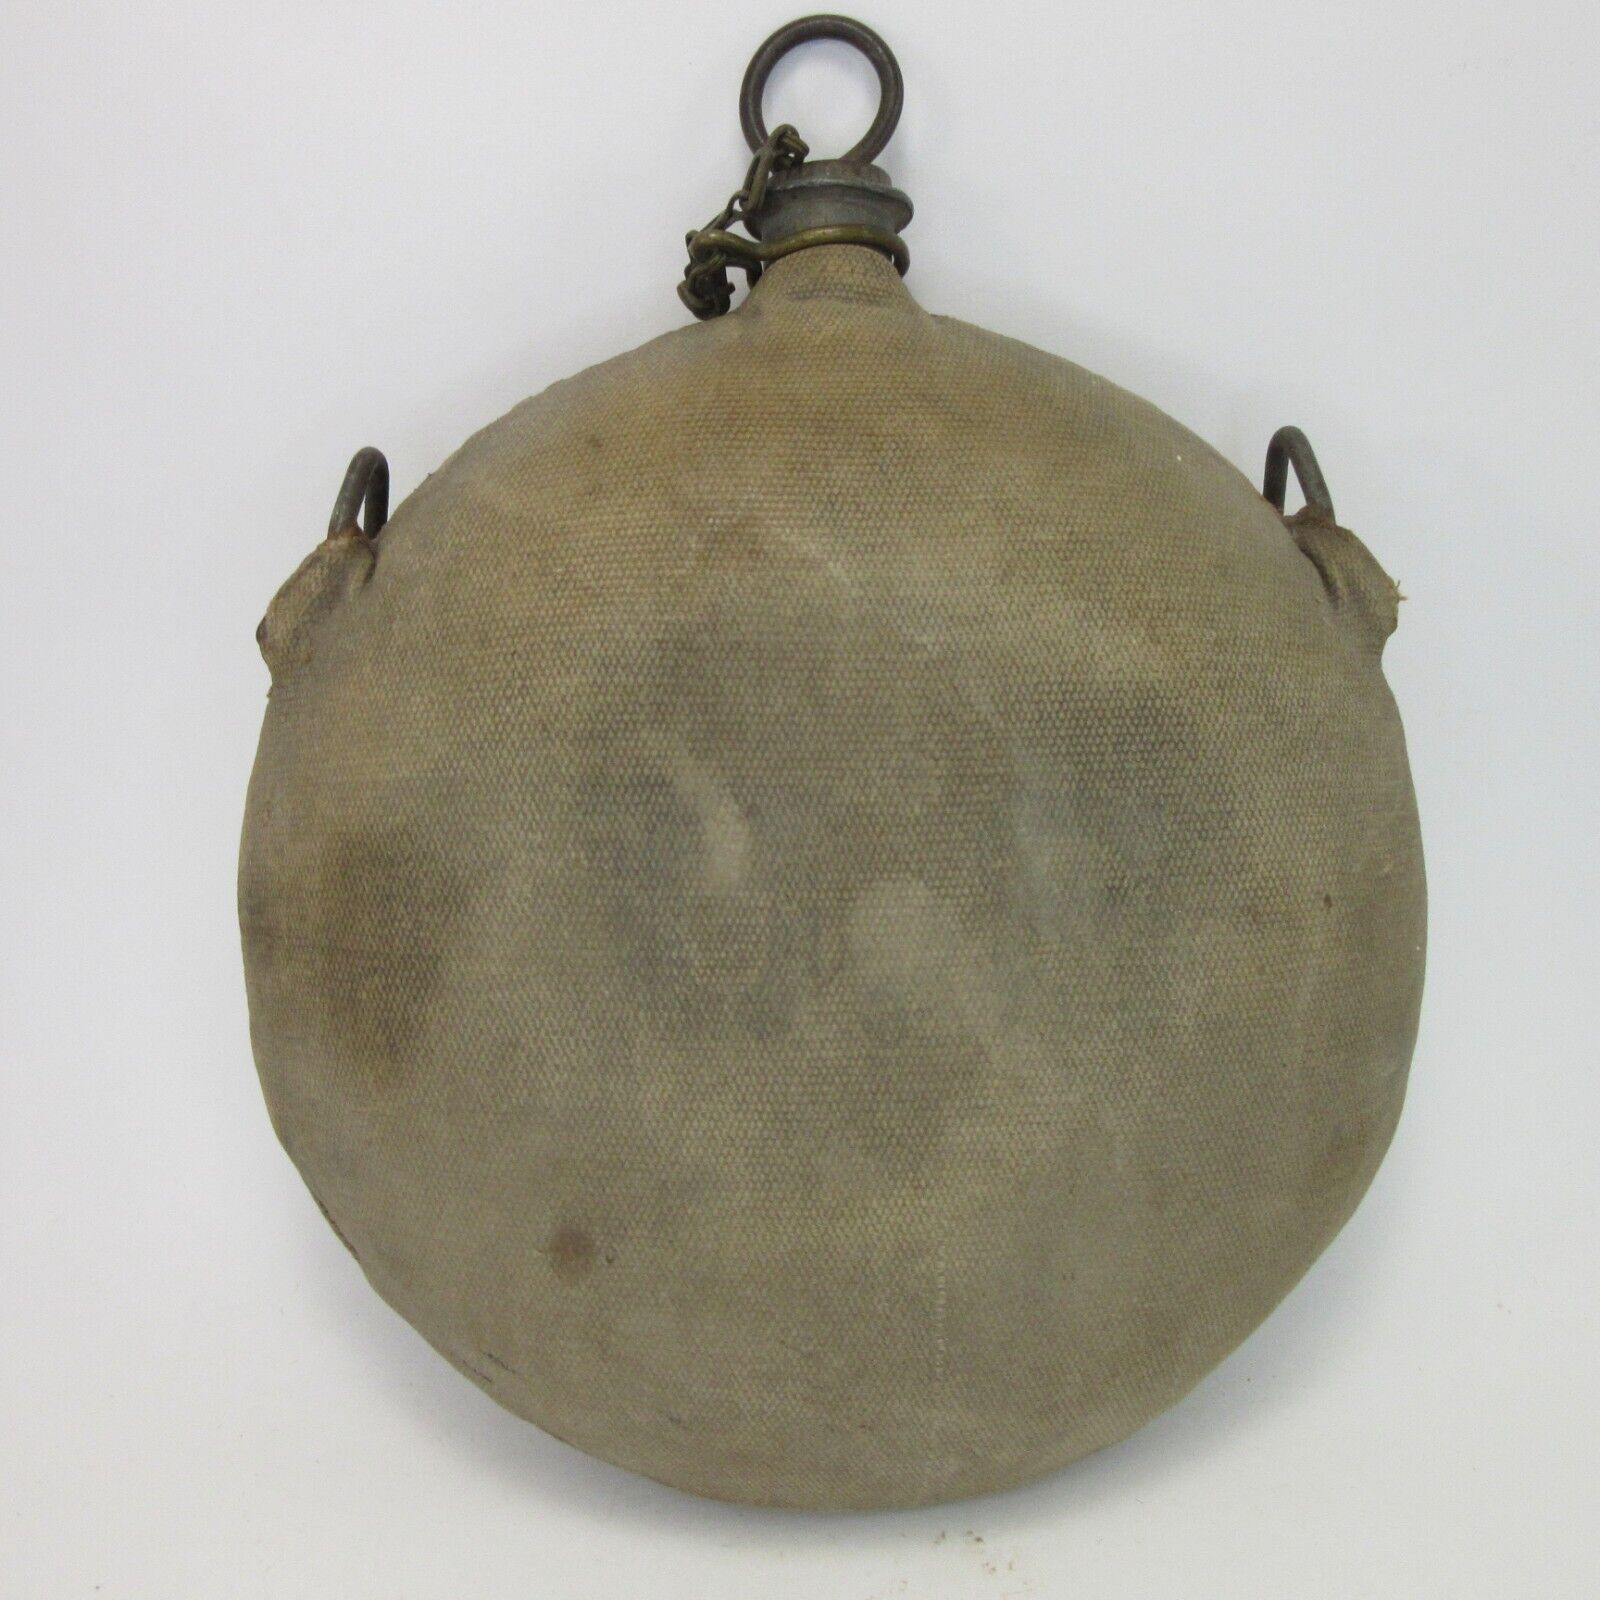 US Antique Canteen Spanish American / Indian War Period